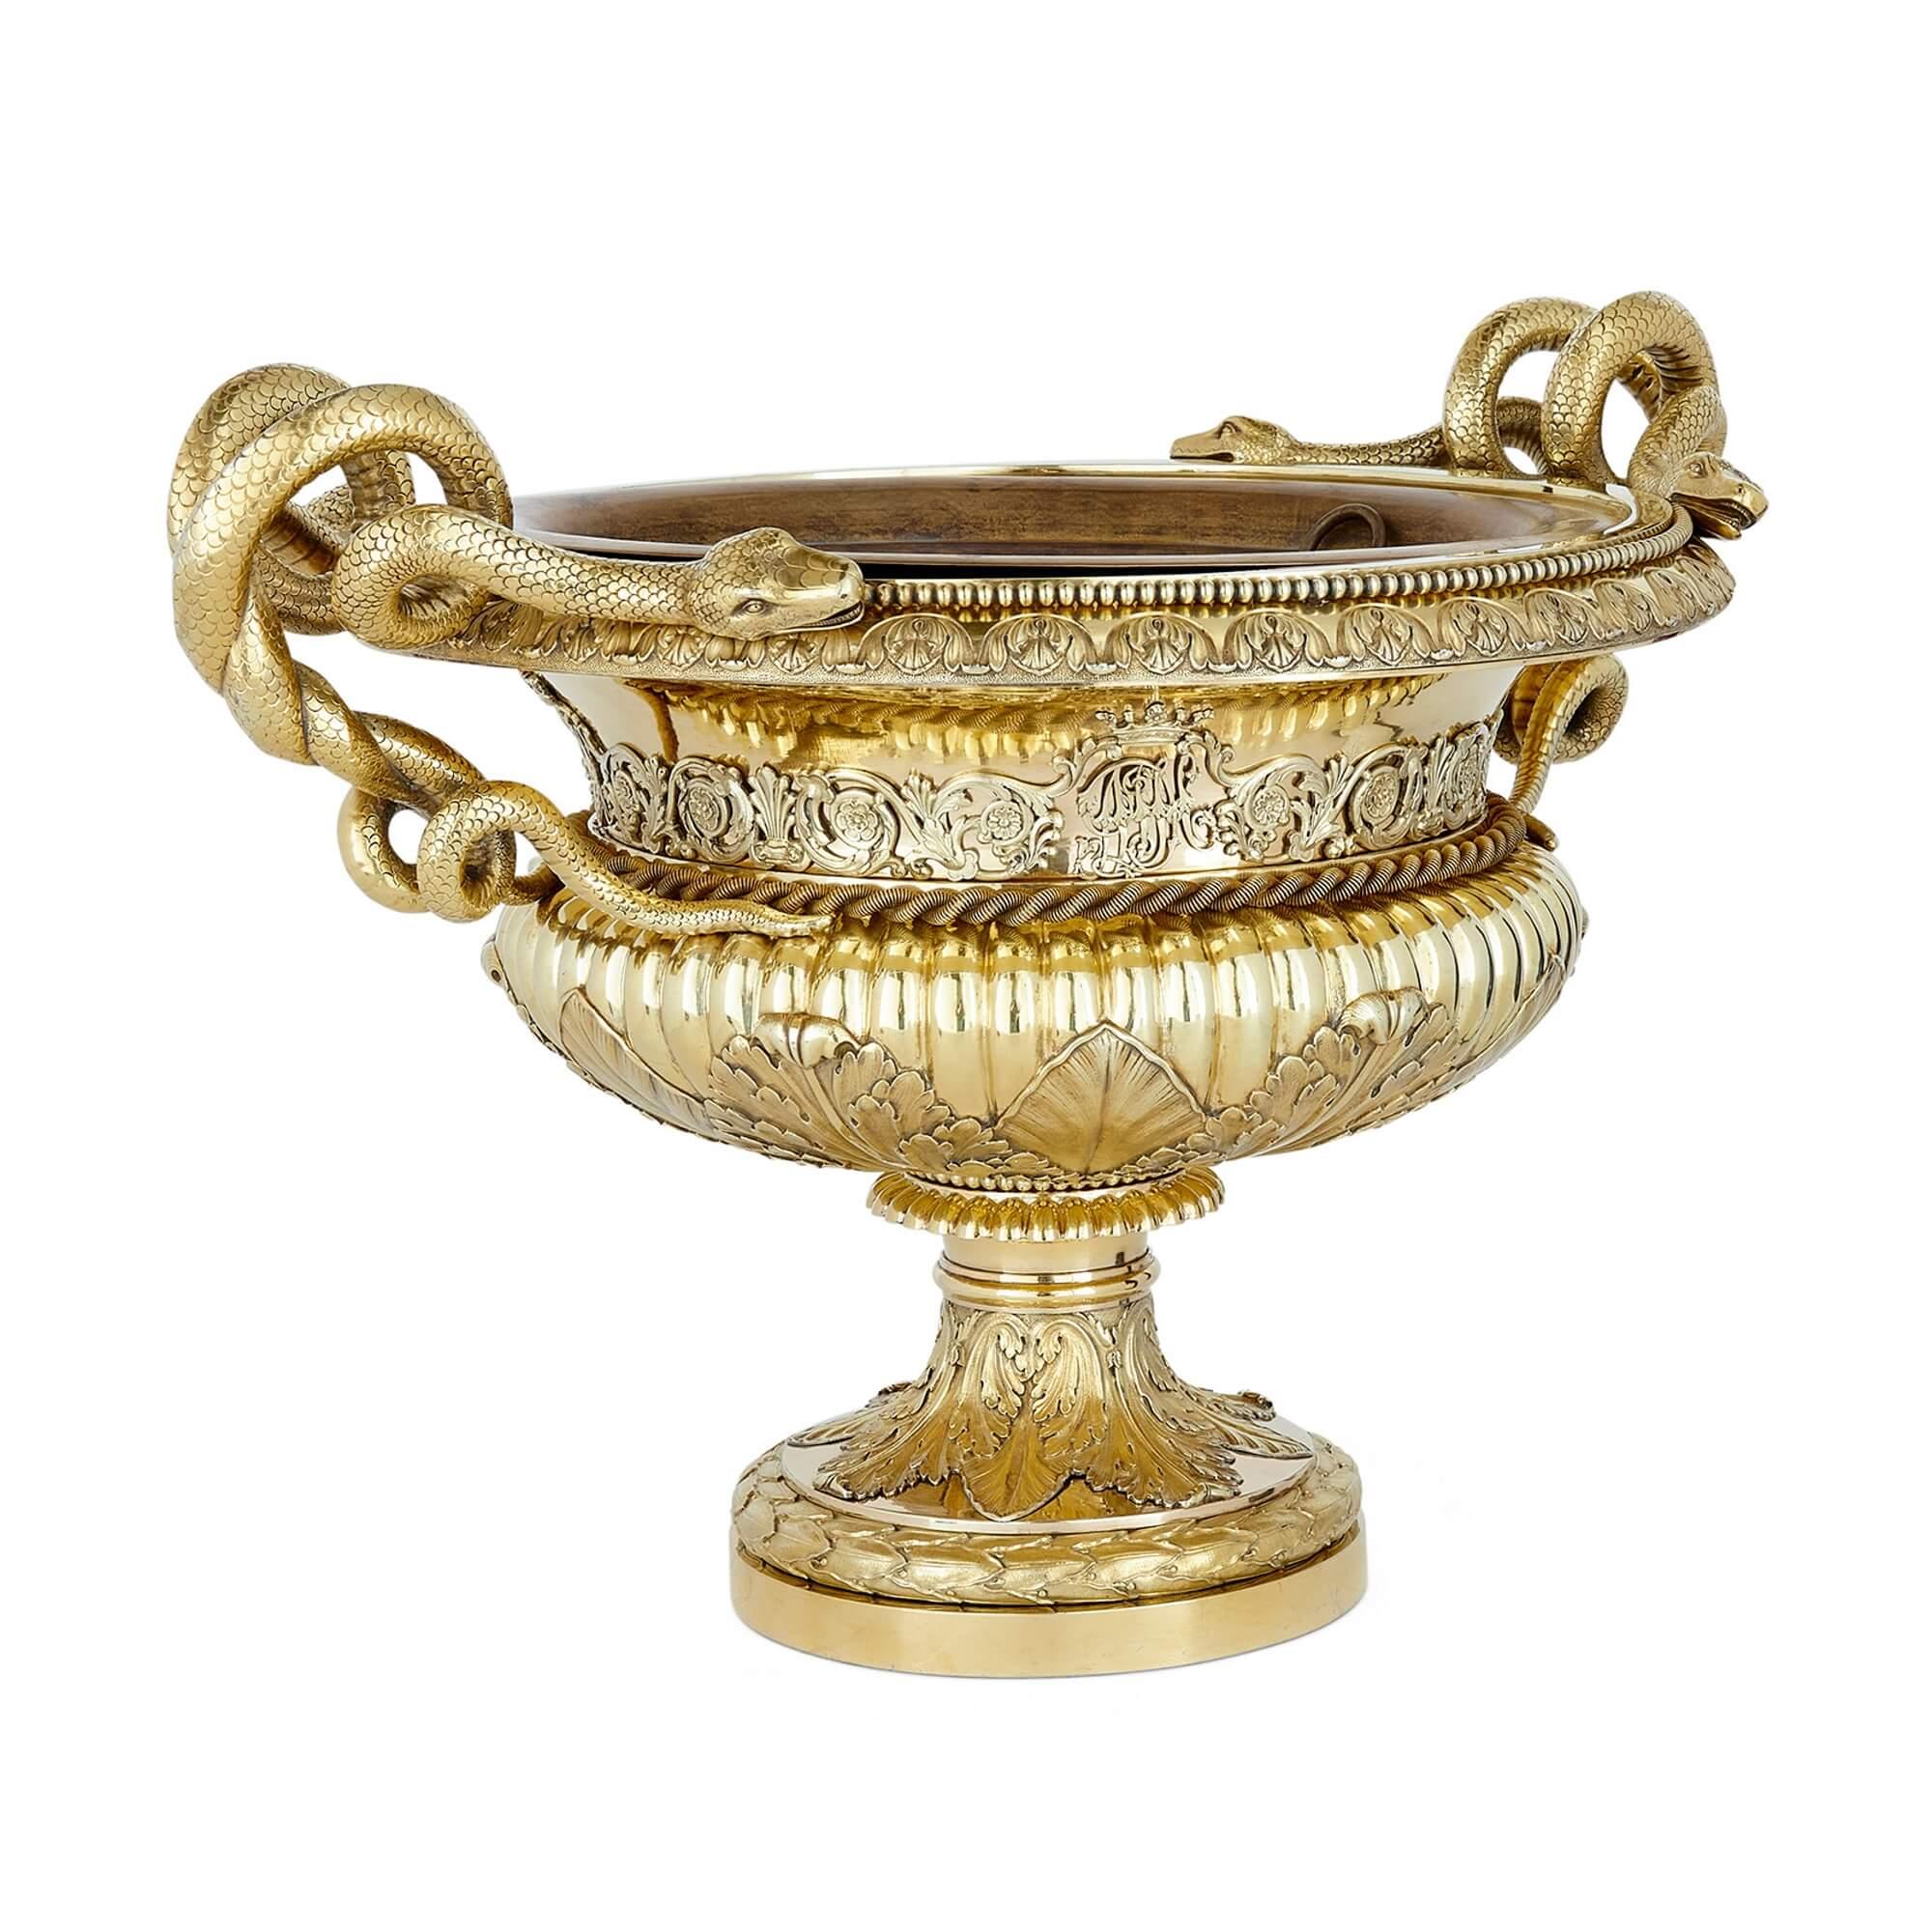 Large Belgian silver gilt vase, 19th century 
Belgian, 19th Century
Height 36cm, width 52cm, depth 39cm

This superb vase is crafted from shining silver gilt. Of rounded campagna form, the composition is richly decorated with applied foliate